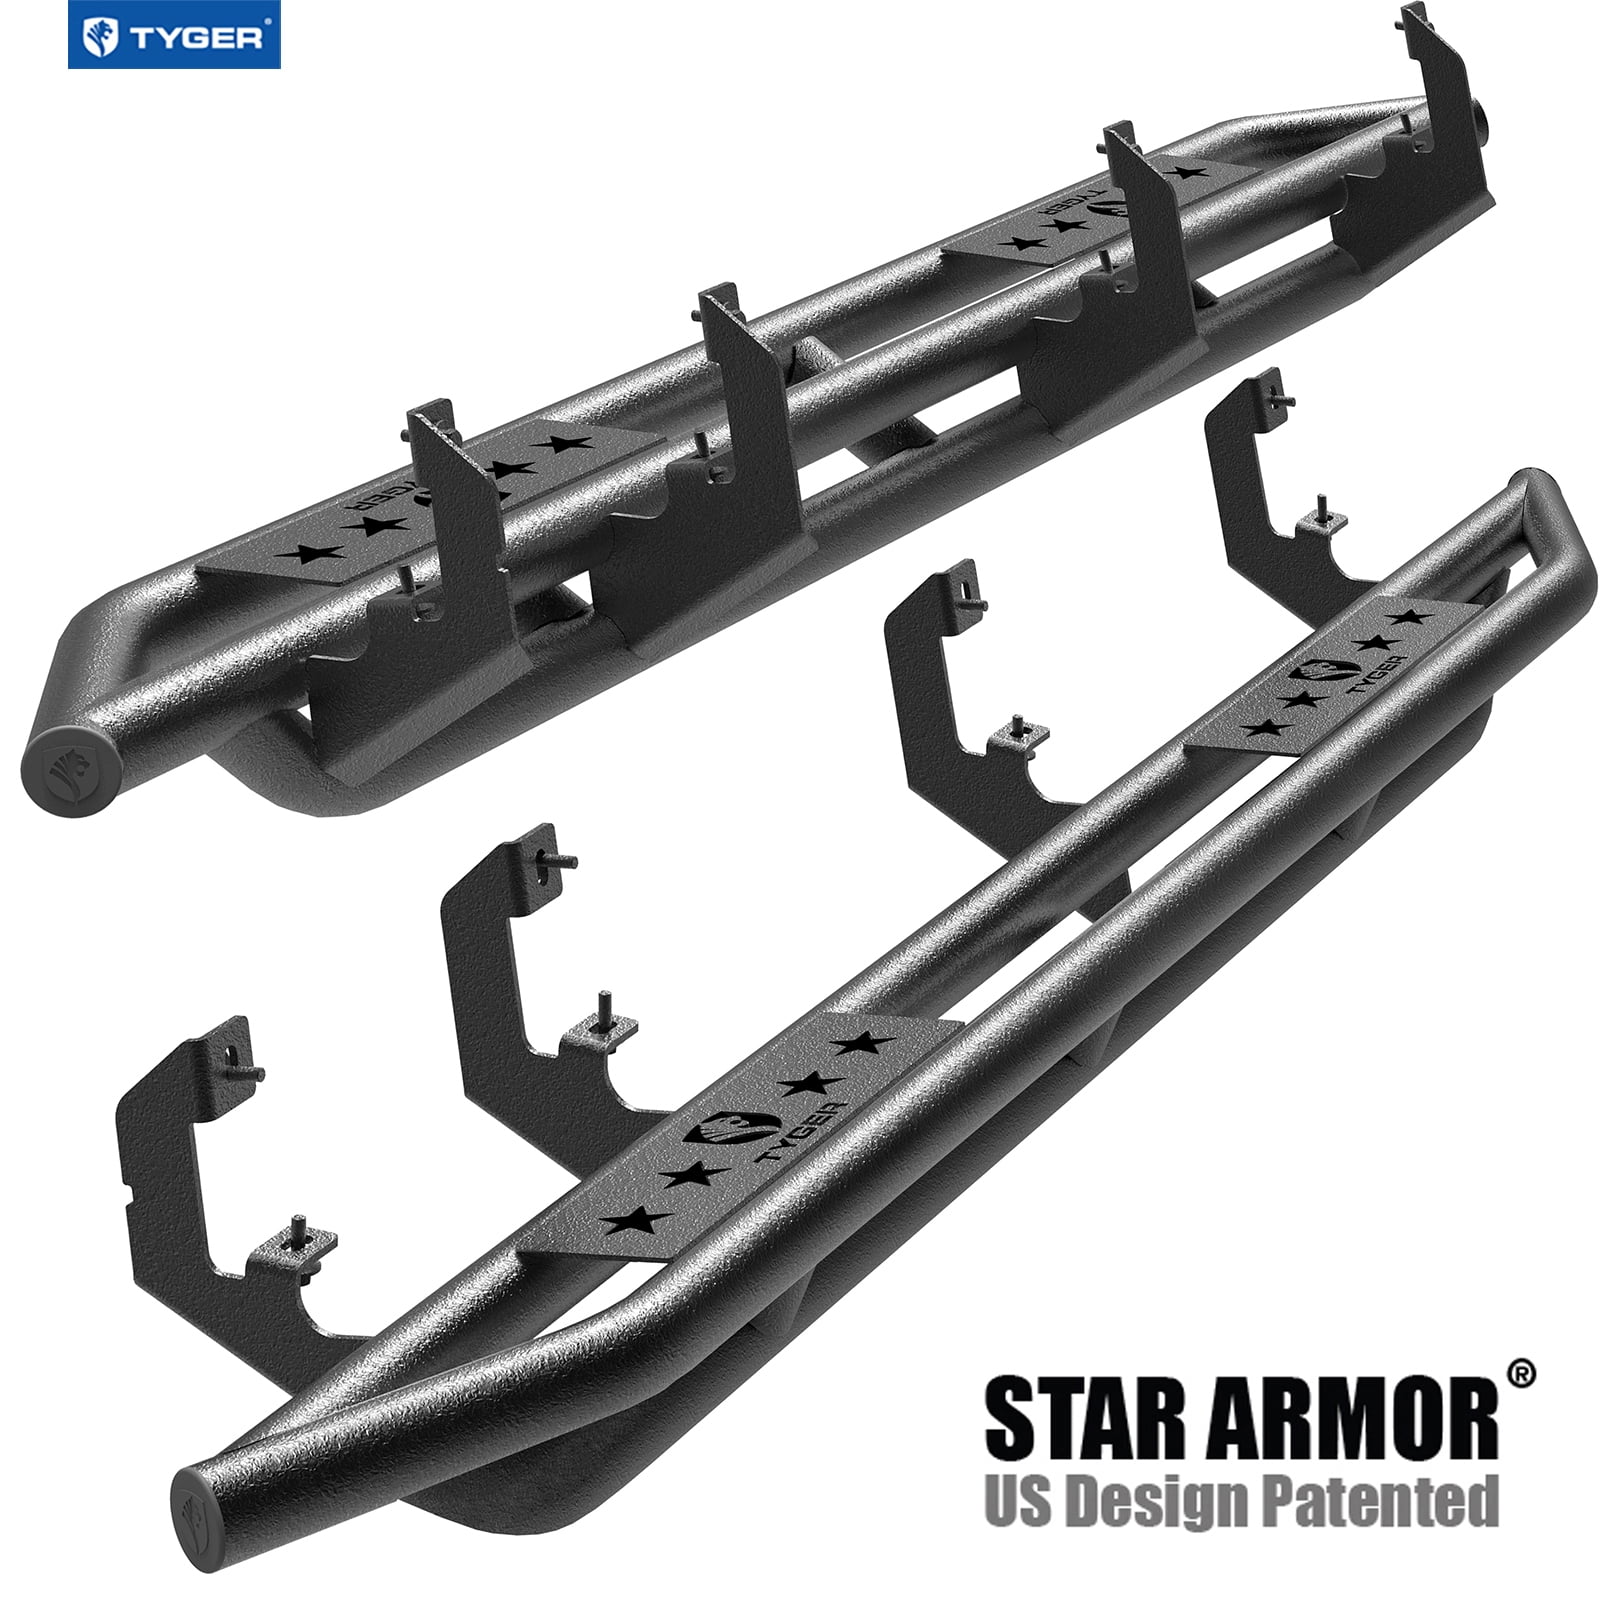 Tyger Auto TG-RS5C50247 Riser 5inch Stainless Steel Side Step Rails Nerf Bars Running Boards Compatible with 2019 Chevy Silverado/GMC Sierra 1500 Crew Cab Excl. Diesel Models with DEF Tanks 